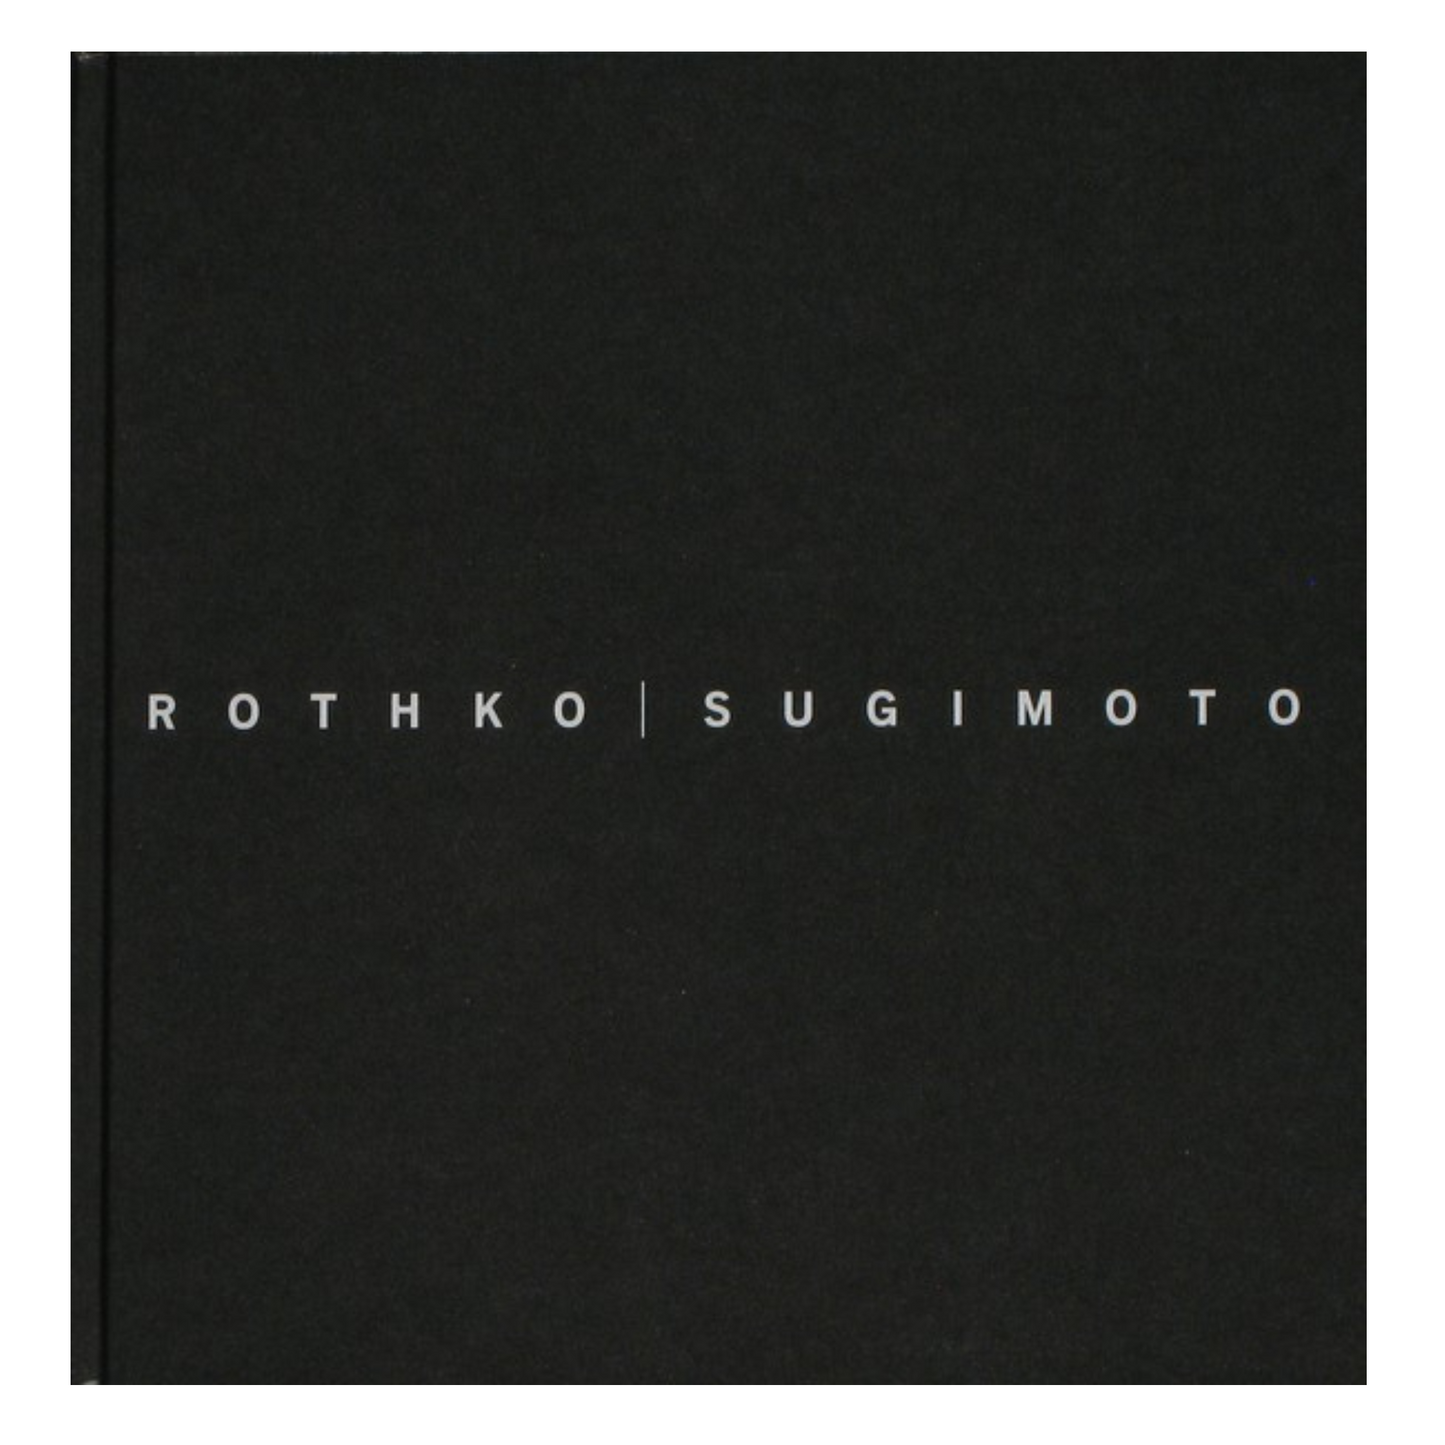 Load image into Gallery viewer, Rothko / Sugimoto: Dark Paintings and Seascapes
